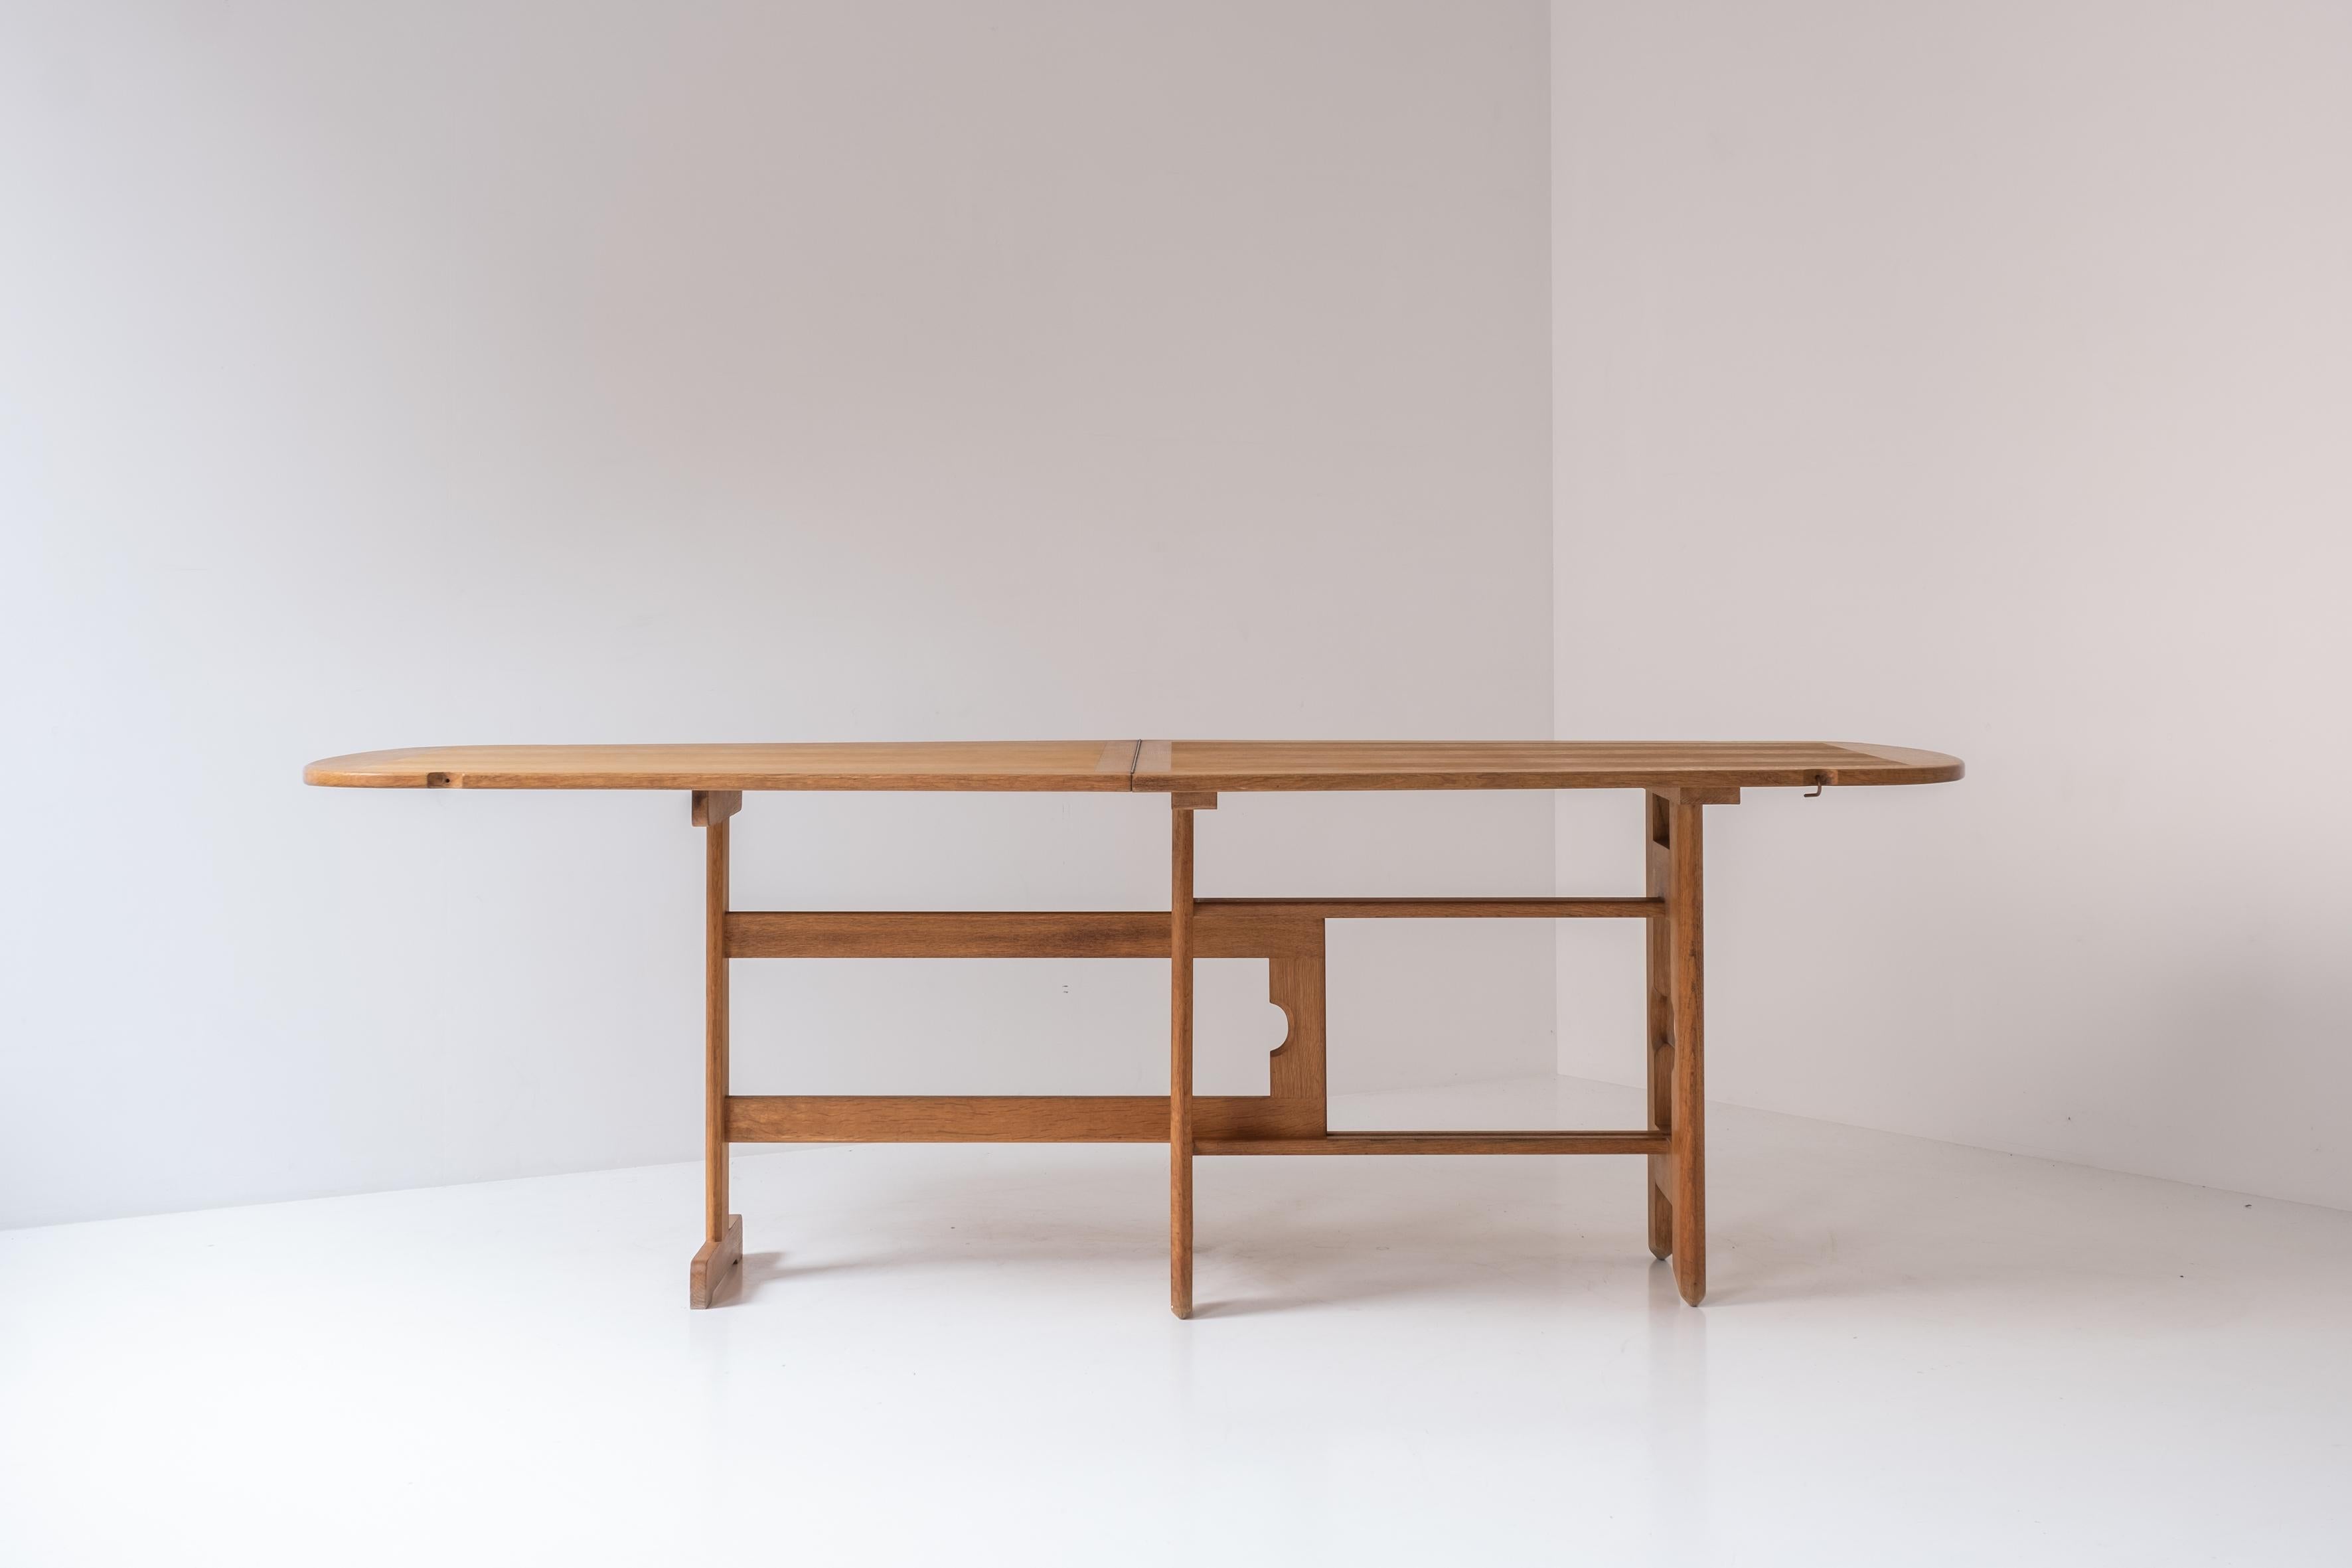 Exceptional folding dining table by Guillerme et Chambron, France 1970s. This architectural Masterpiece features a solid oak construction, exceptional base, and folding table top that can expand as needed. In overall very well presented and original